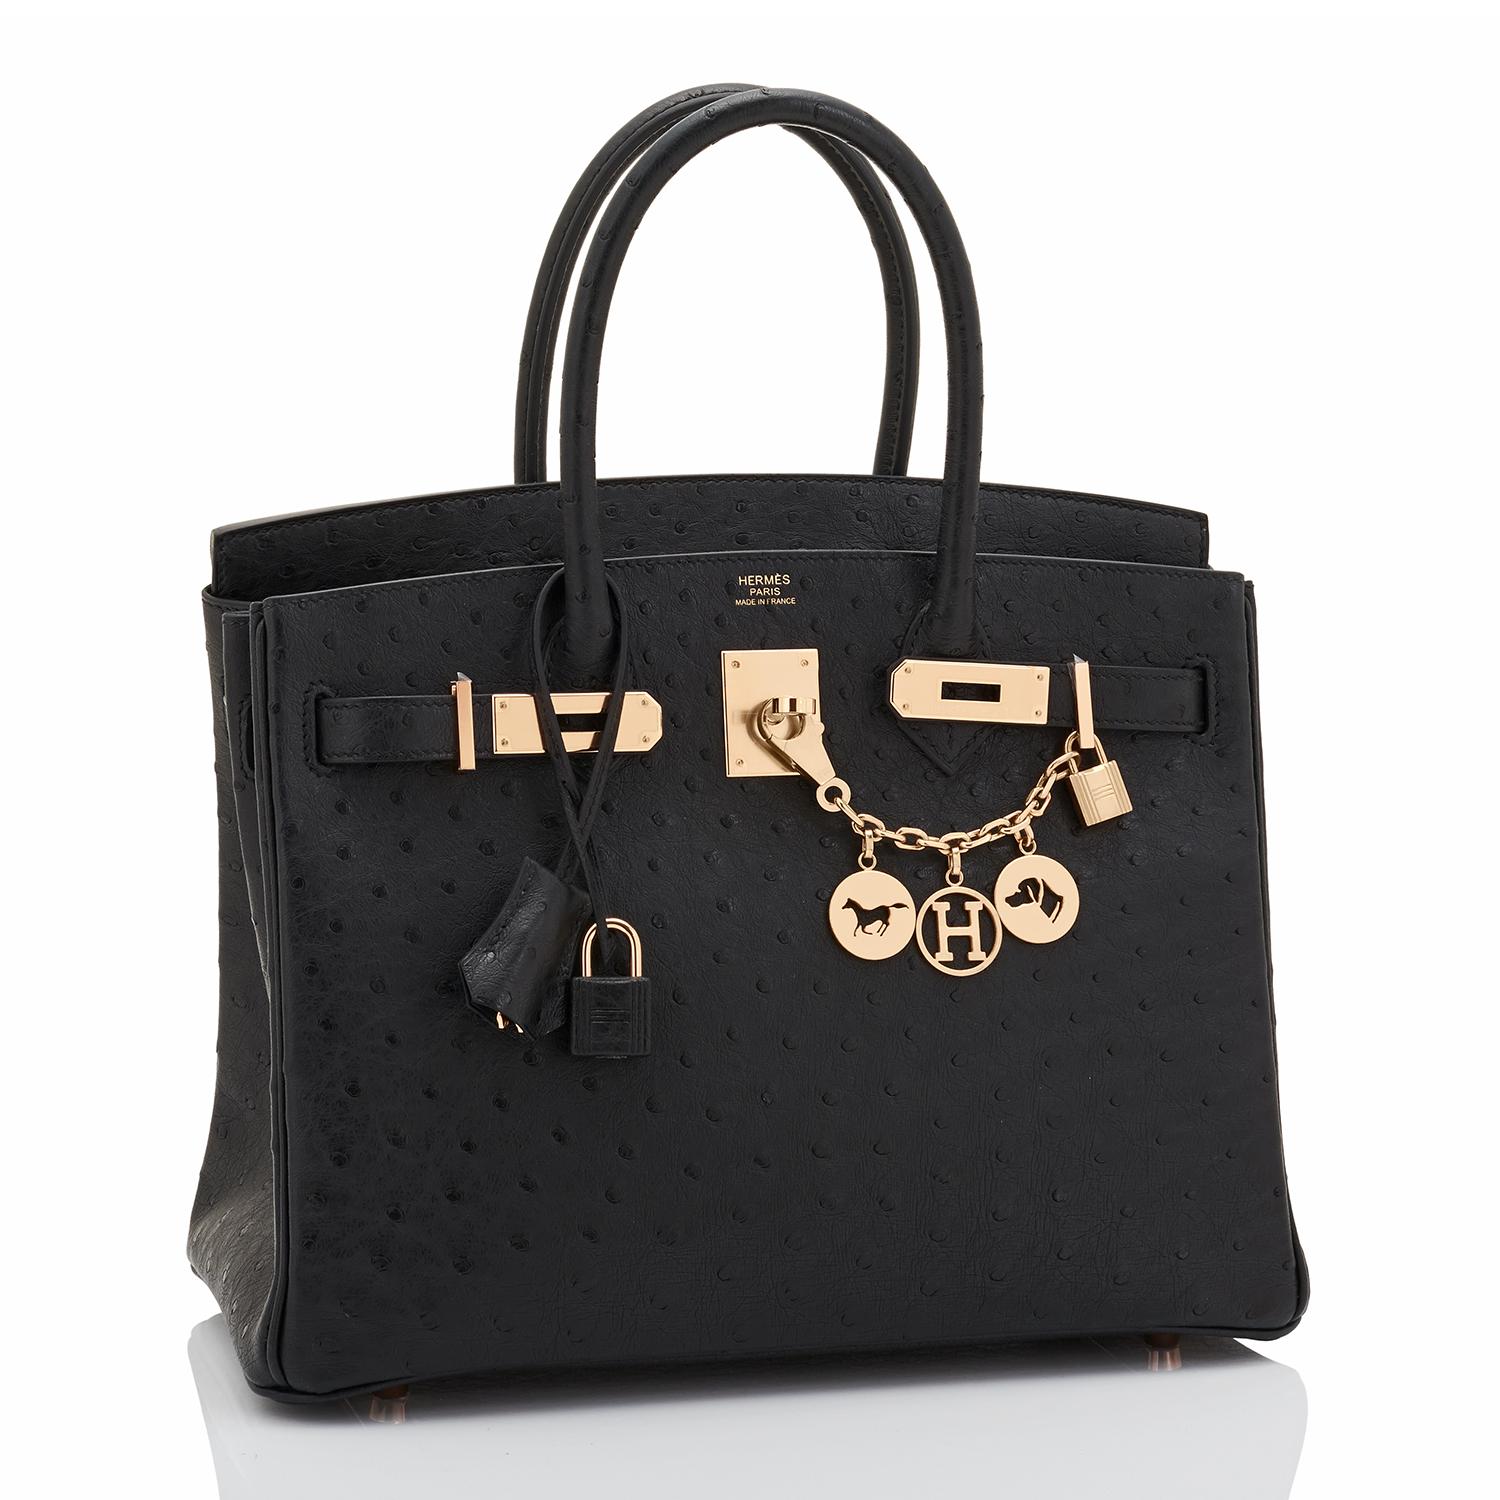 Hermes Birkin 30cm Black Ostrich Rose Gold Hardware Bag Y Stamp, 2020 RARE
Brand New in Box. Store Fresh. Pristine Condition (with plastic on hardware)
Just purchased from Hermes store; bag bears new 2020 interior Y stamp! 
Perfect gift! Comes with